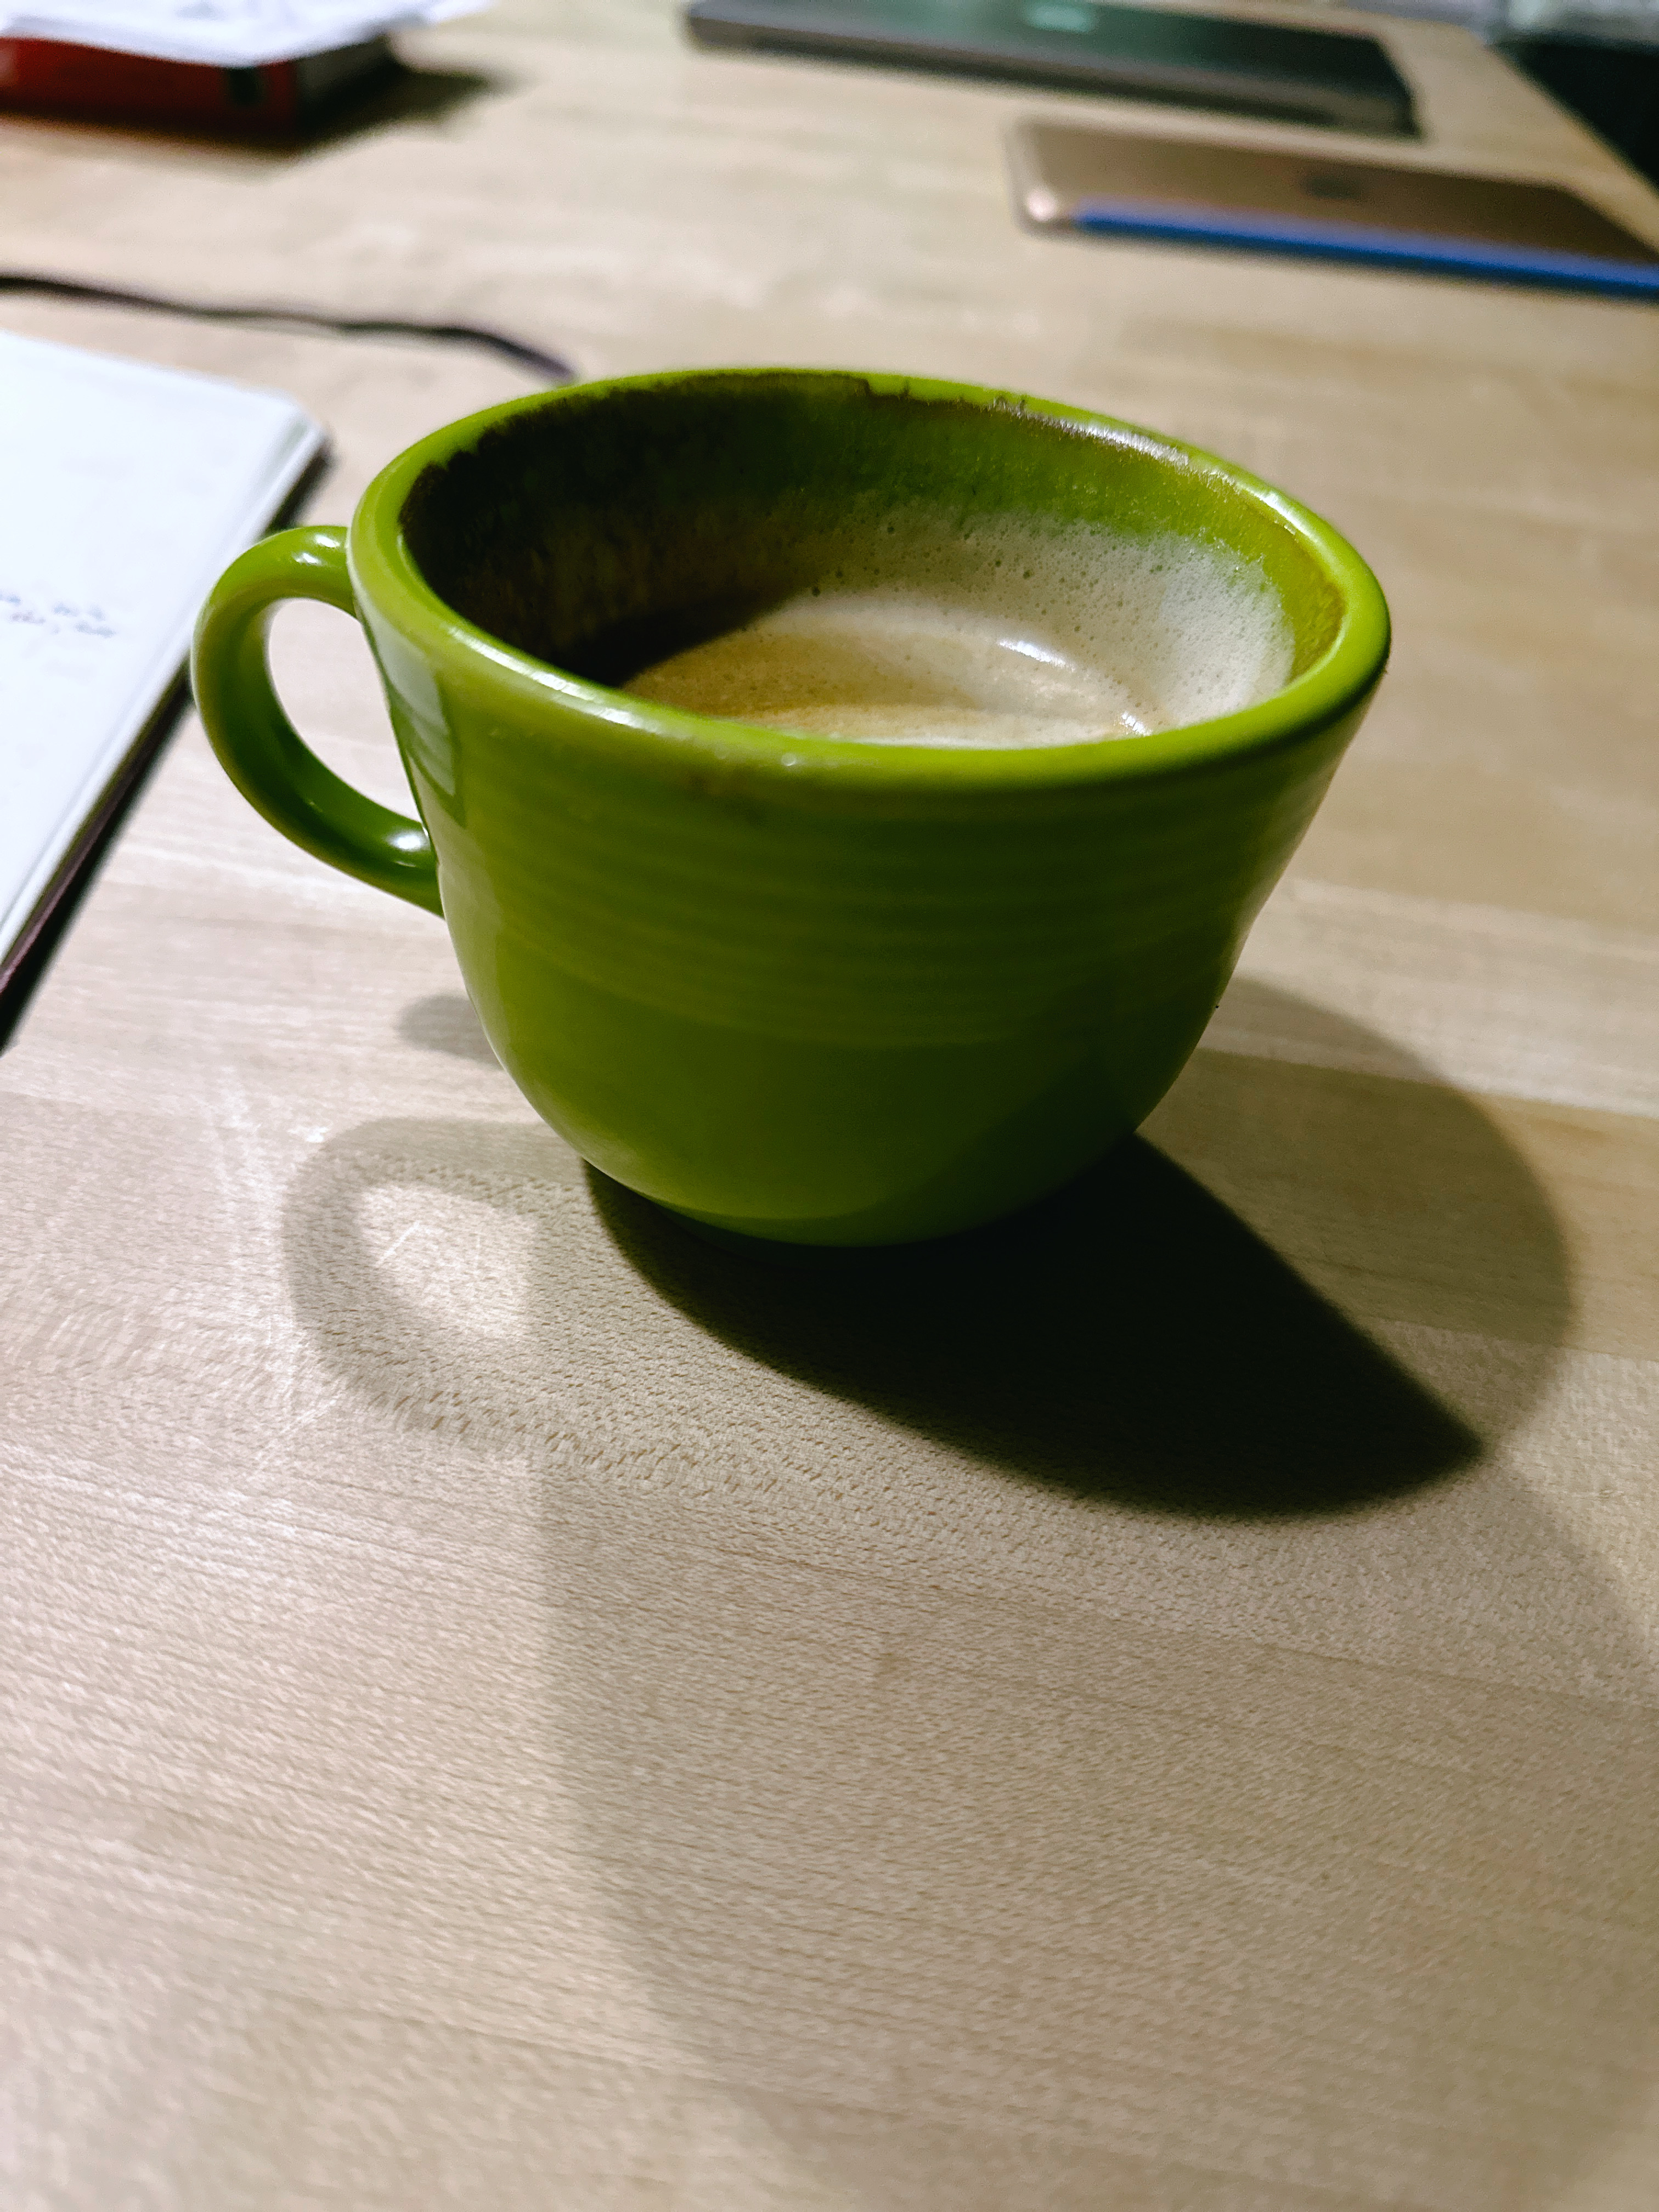 A green, half full cup of milky coffee, in a wooden countertop beside an open notebook. 